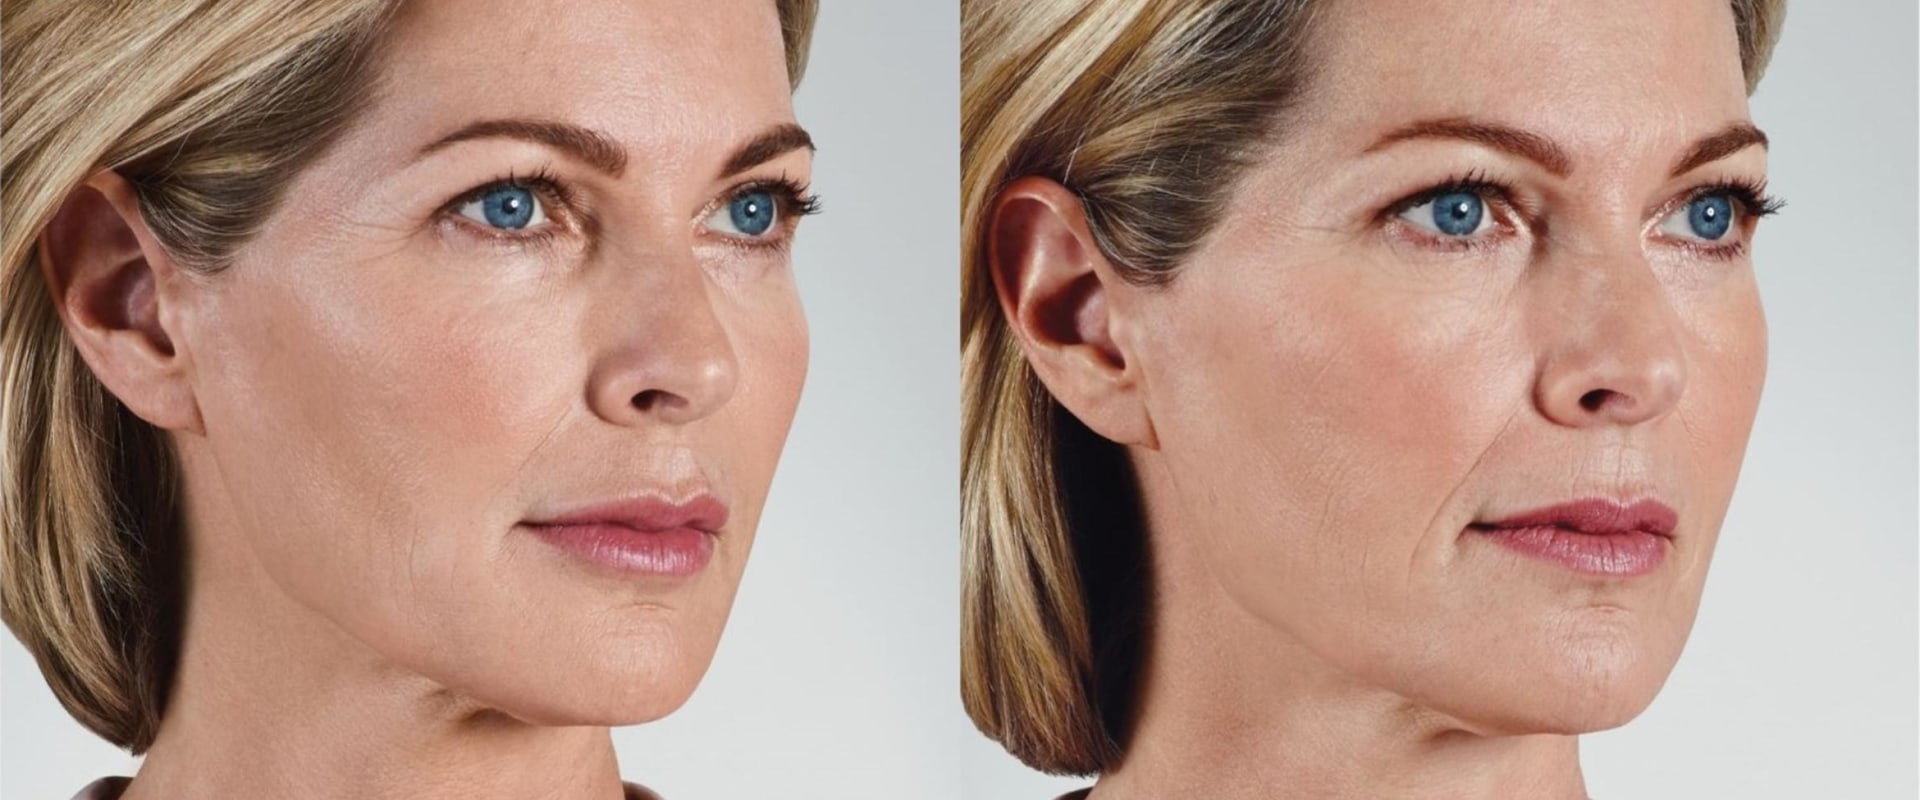 Can you use juvederm between your eyebrows?